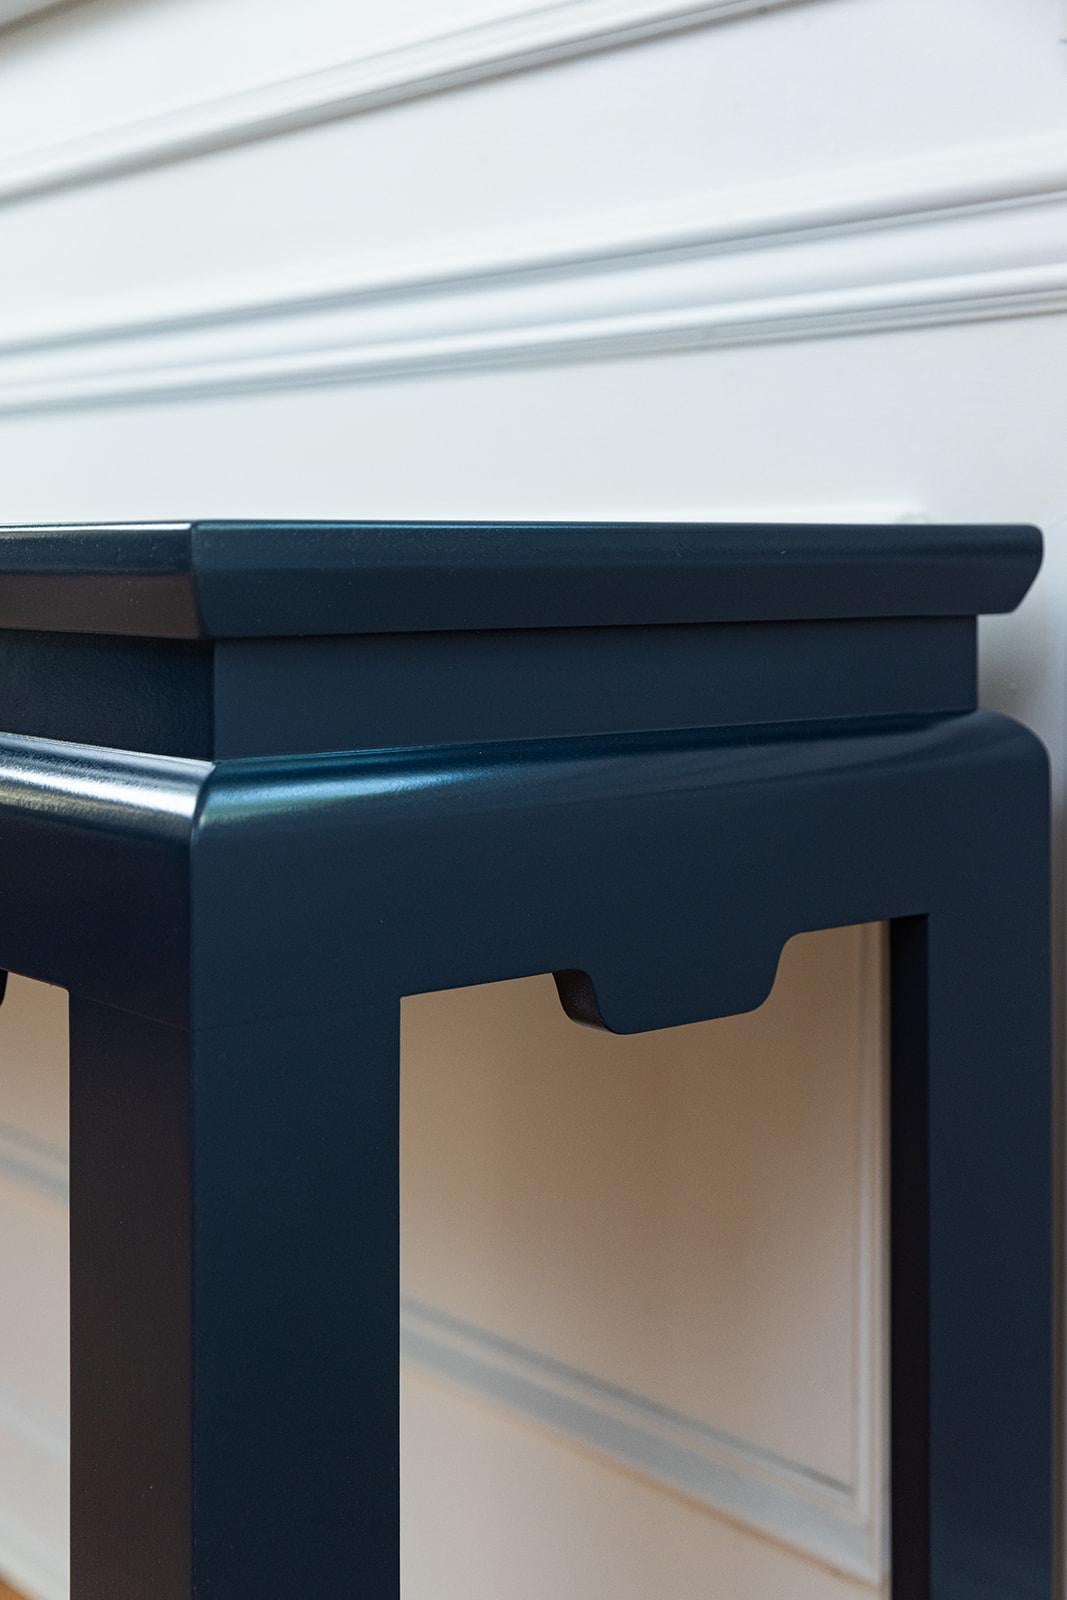 Bespoke Modern Ming Console Table Custom Built and Lacquered Hale Navy Gloss For Sale 2